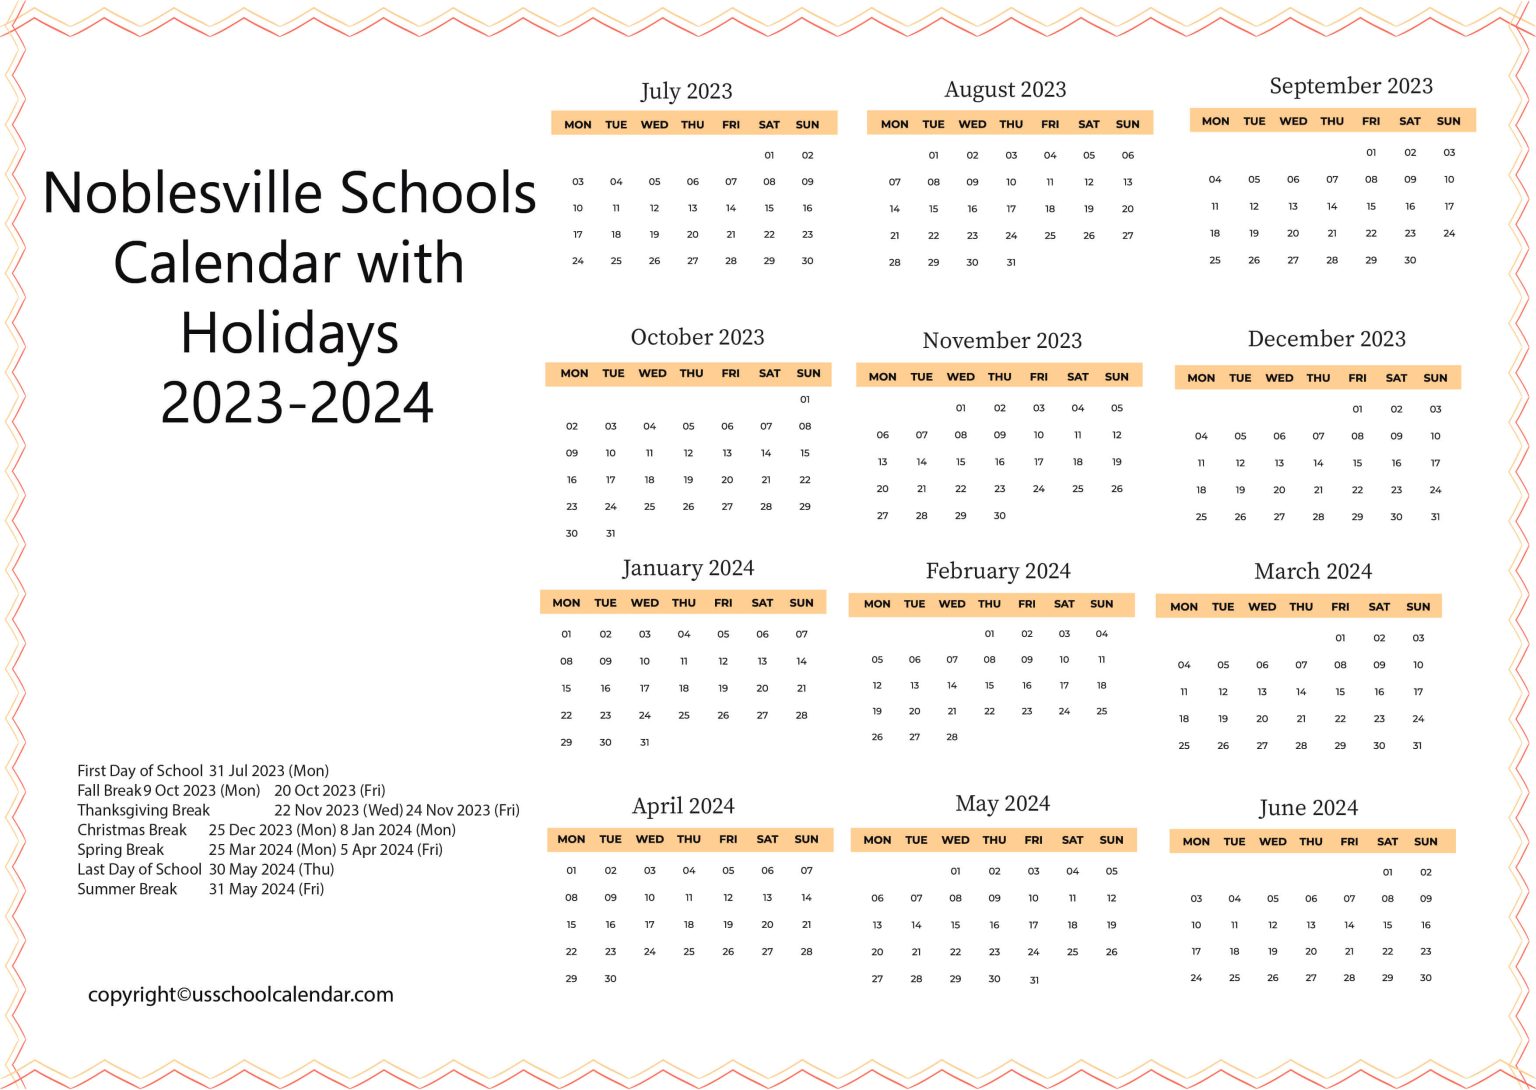 Noblesville Schools Calendar with Holidays 2023 2024